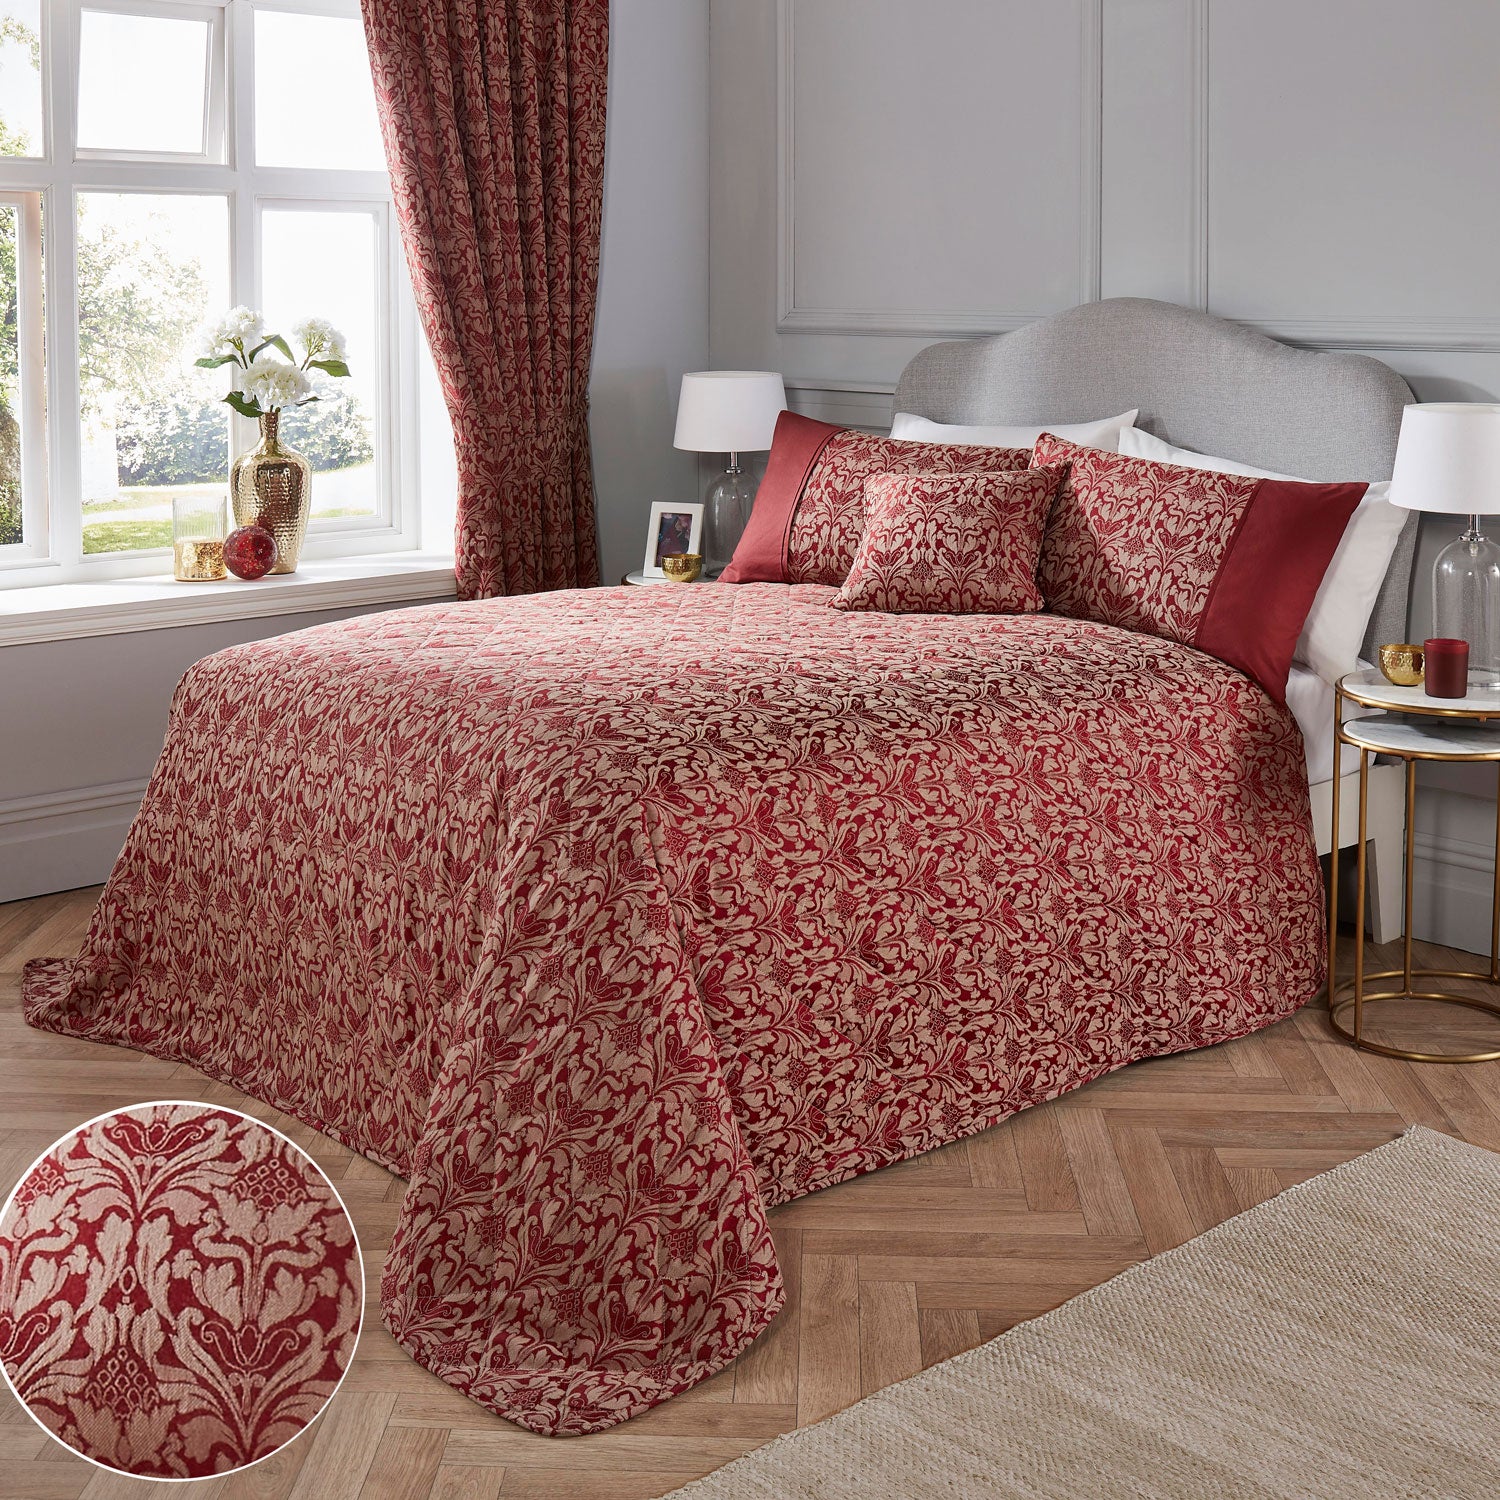  The Home Bedroom Hawthorn Duvet Cover Set 1 Shaws Department Stores